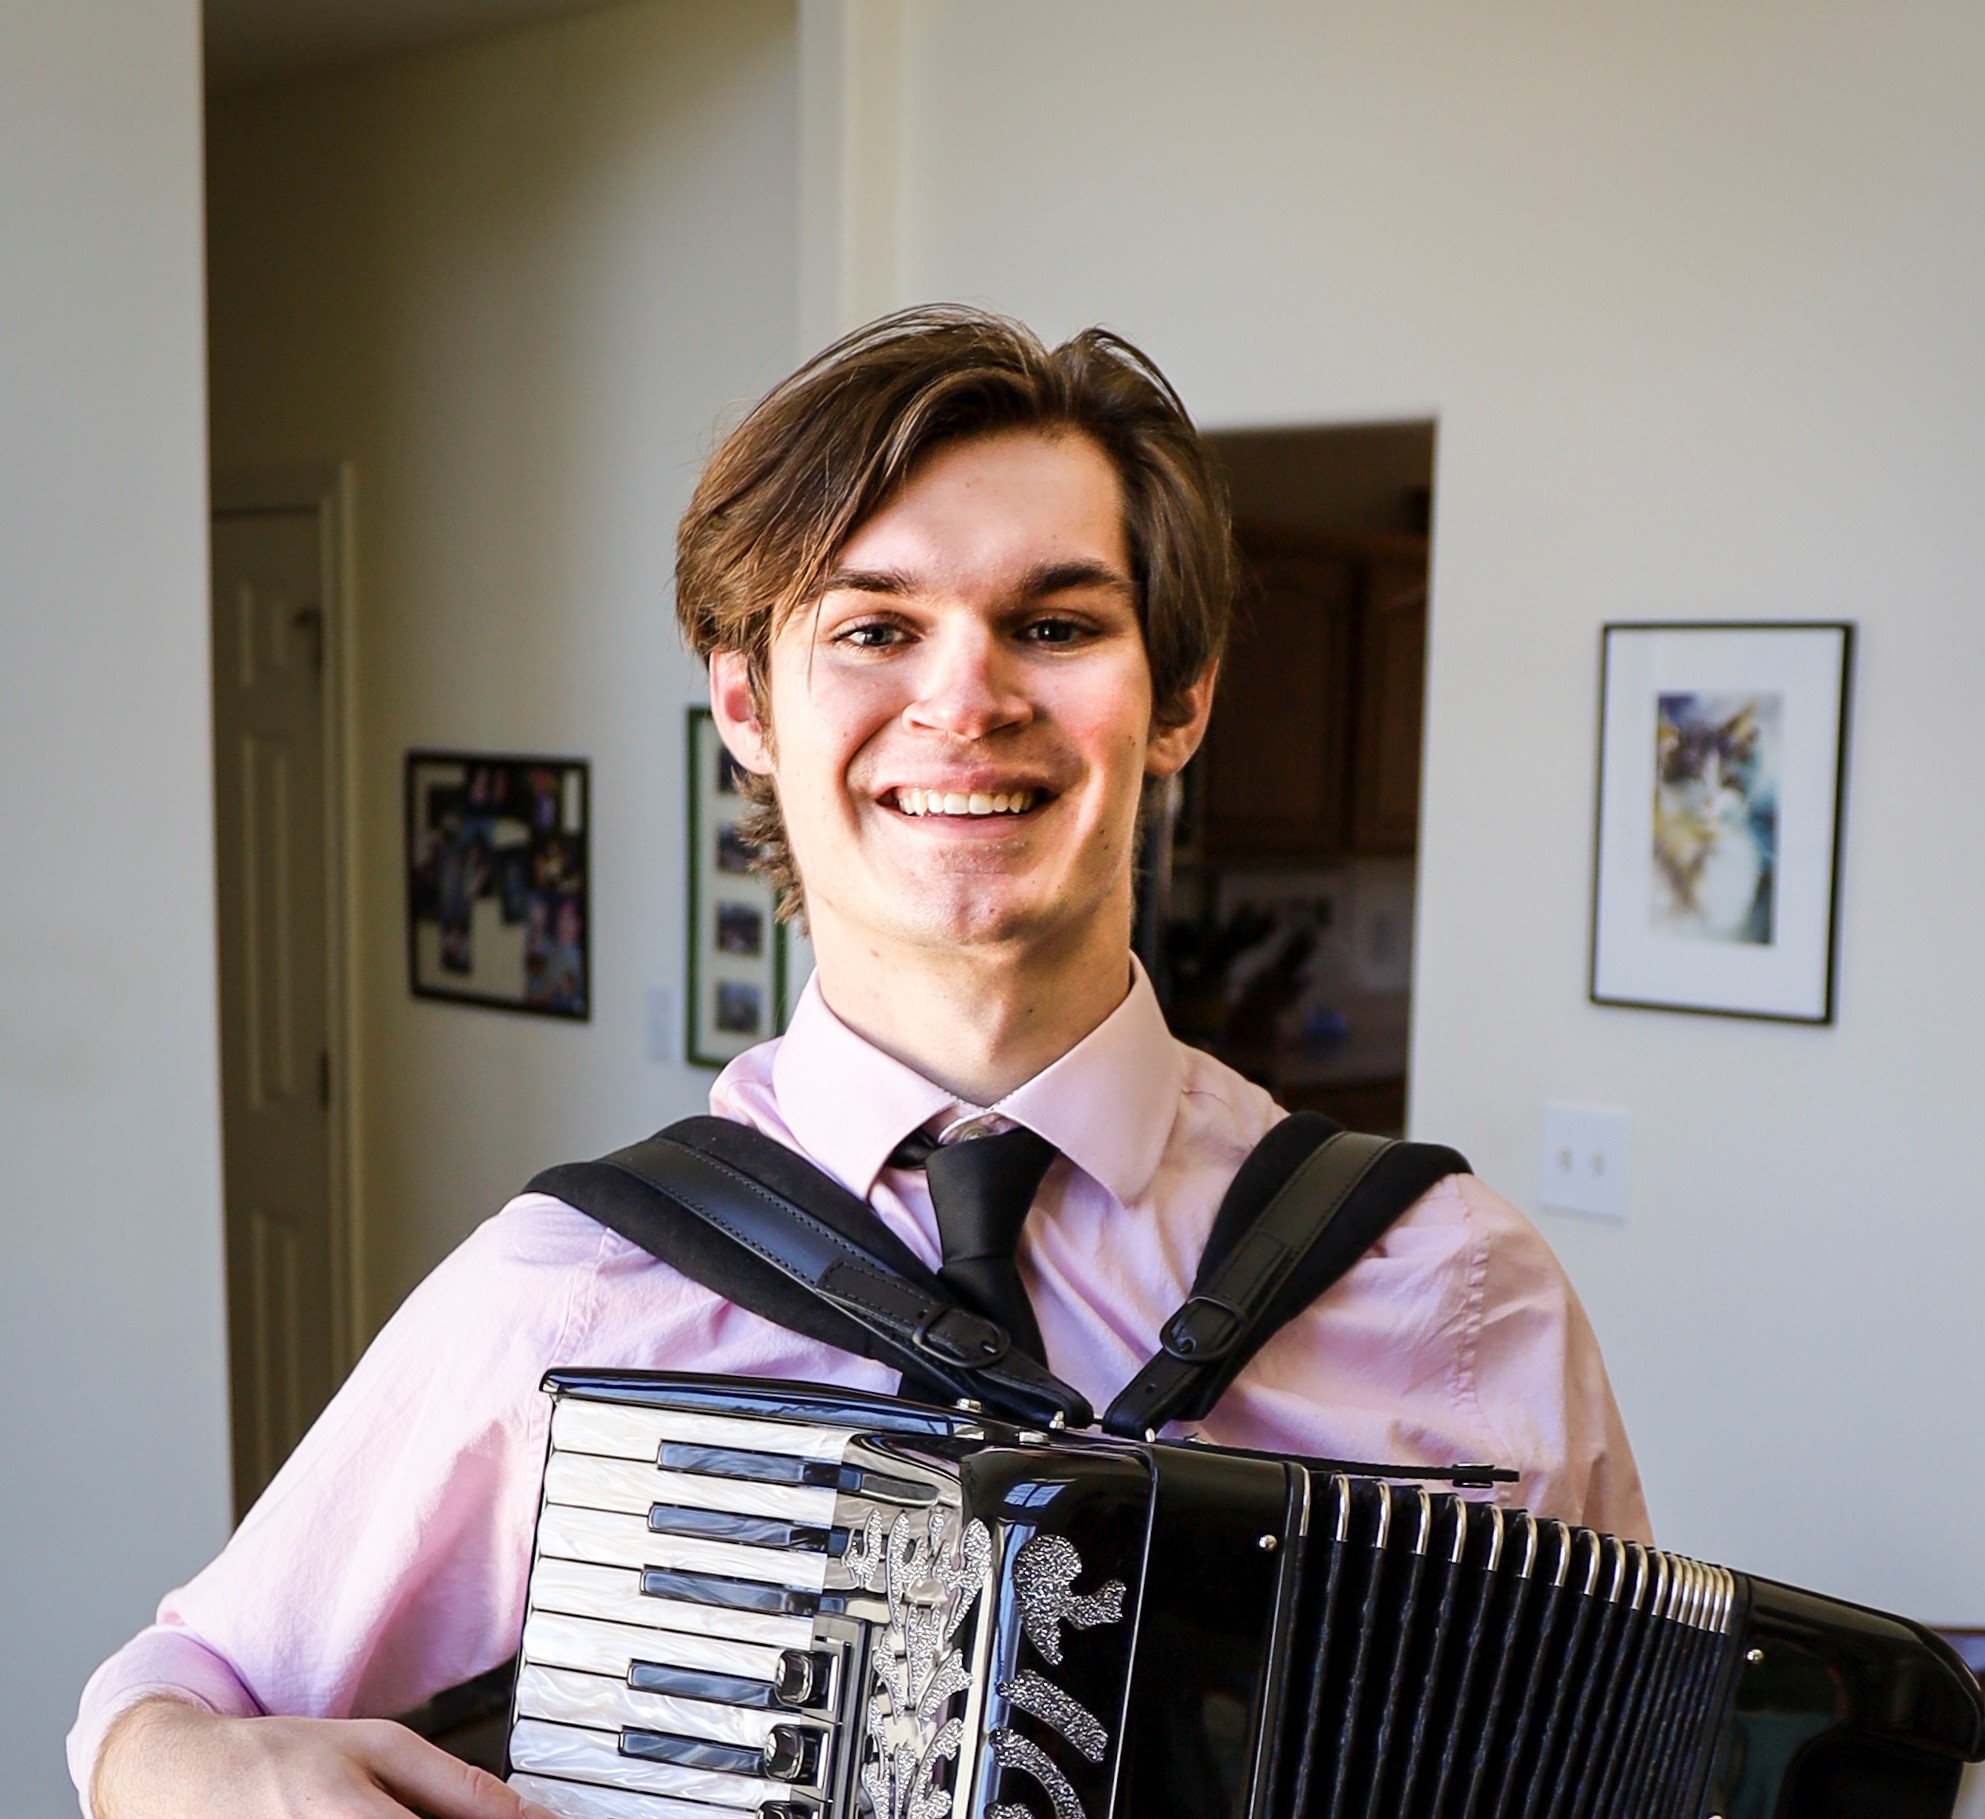 Young man smiling, holding an accordion